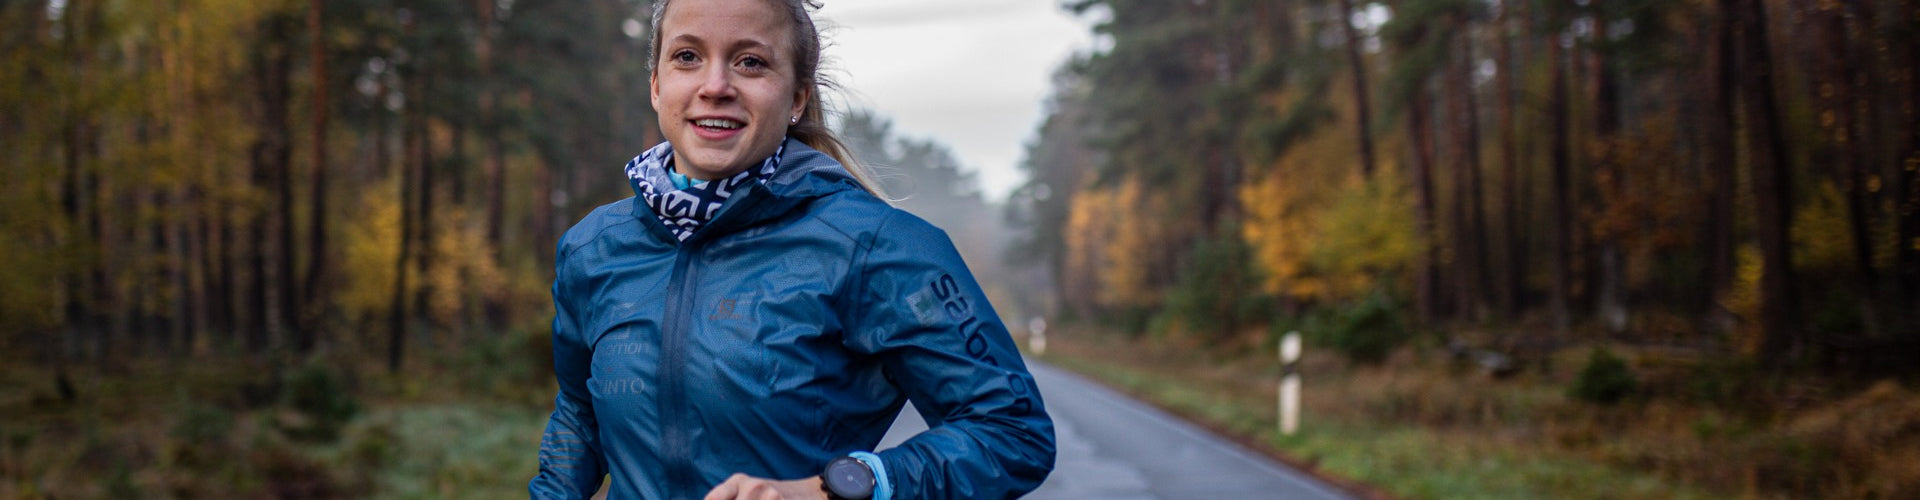 Woman on road surrounded by forest in Salomon running gear